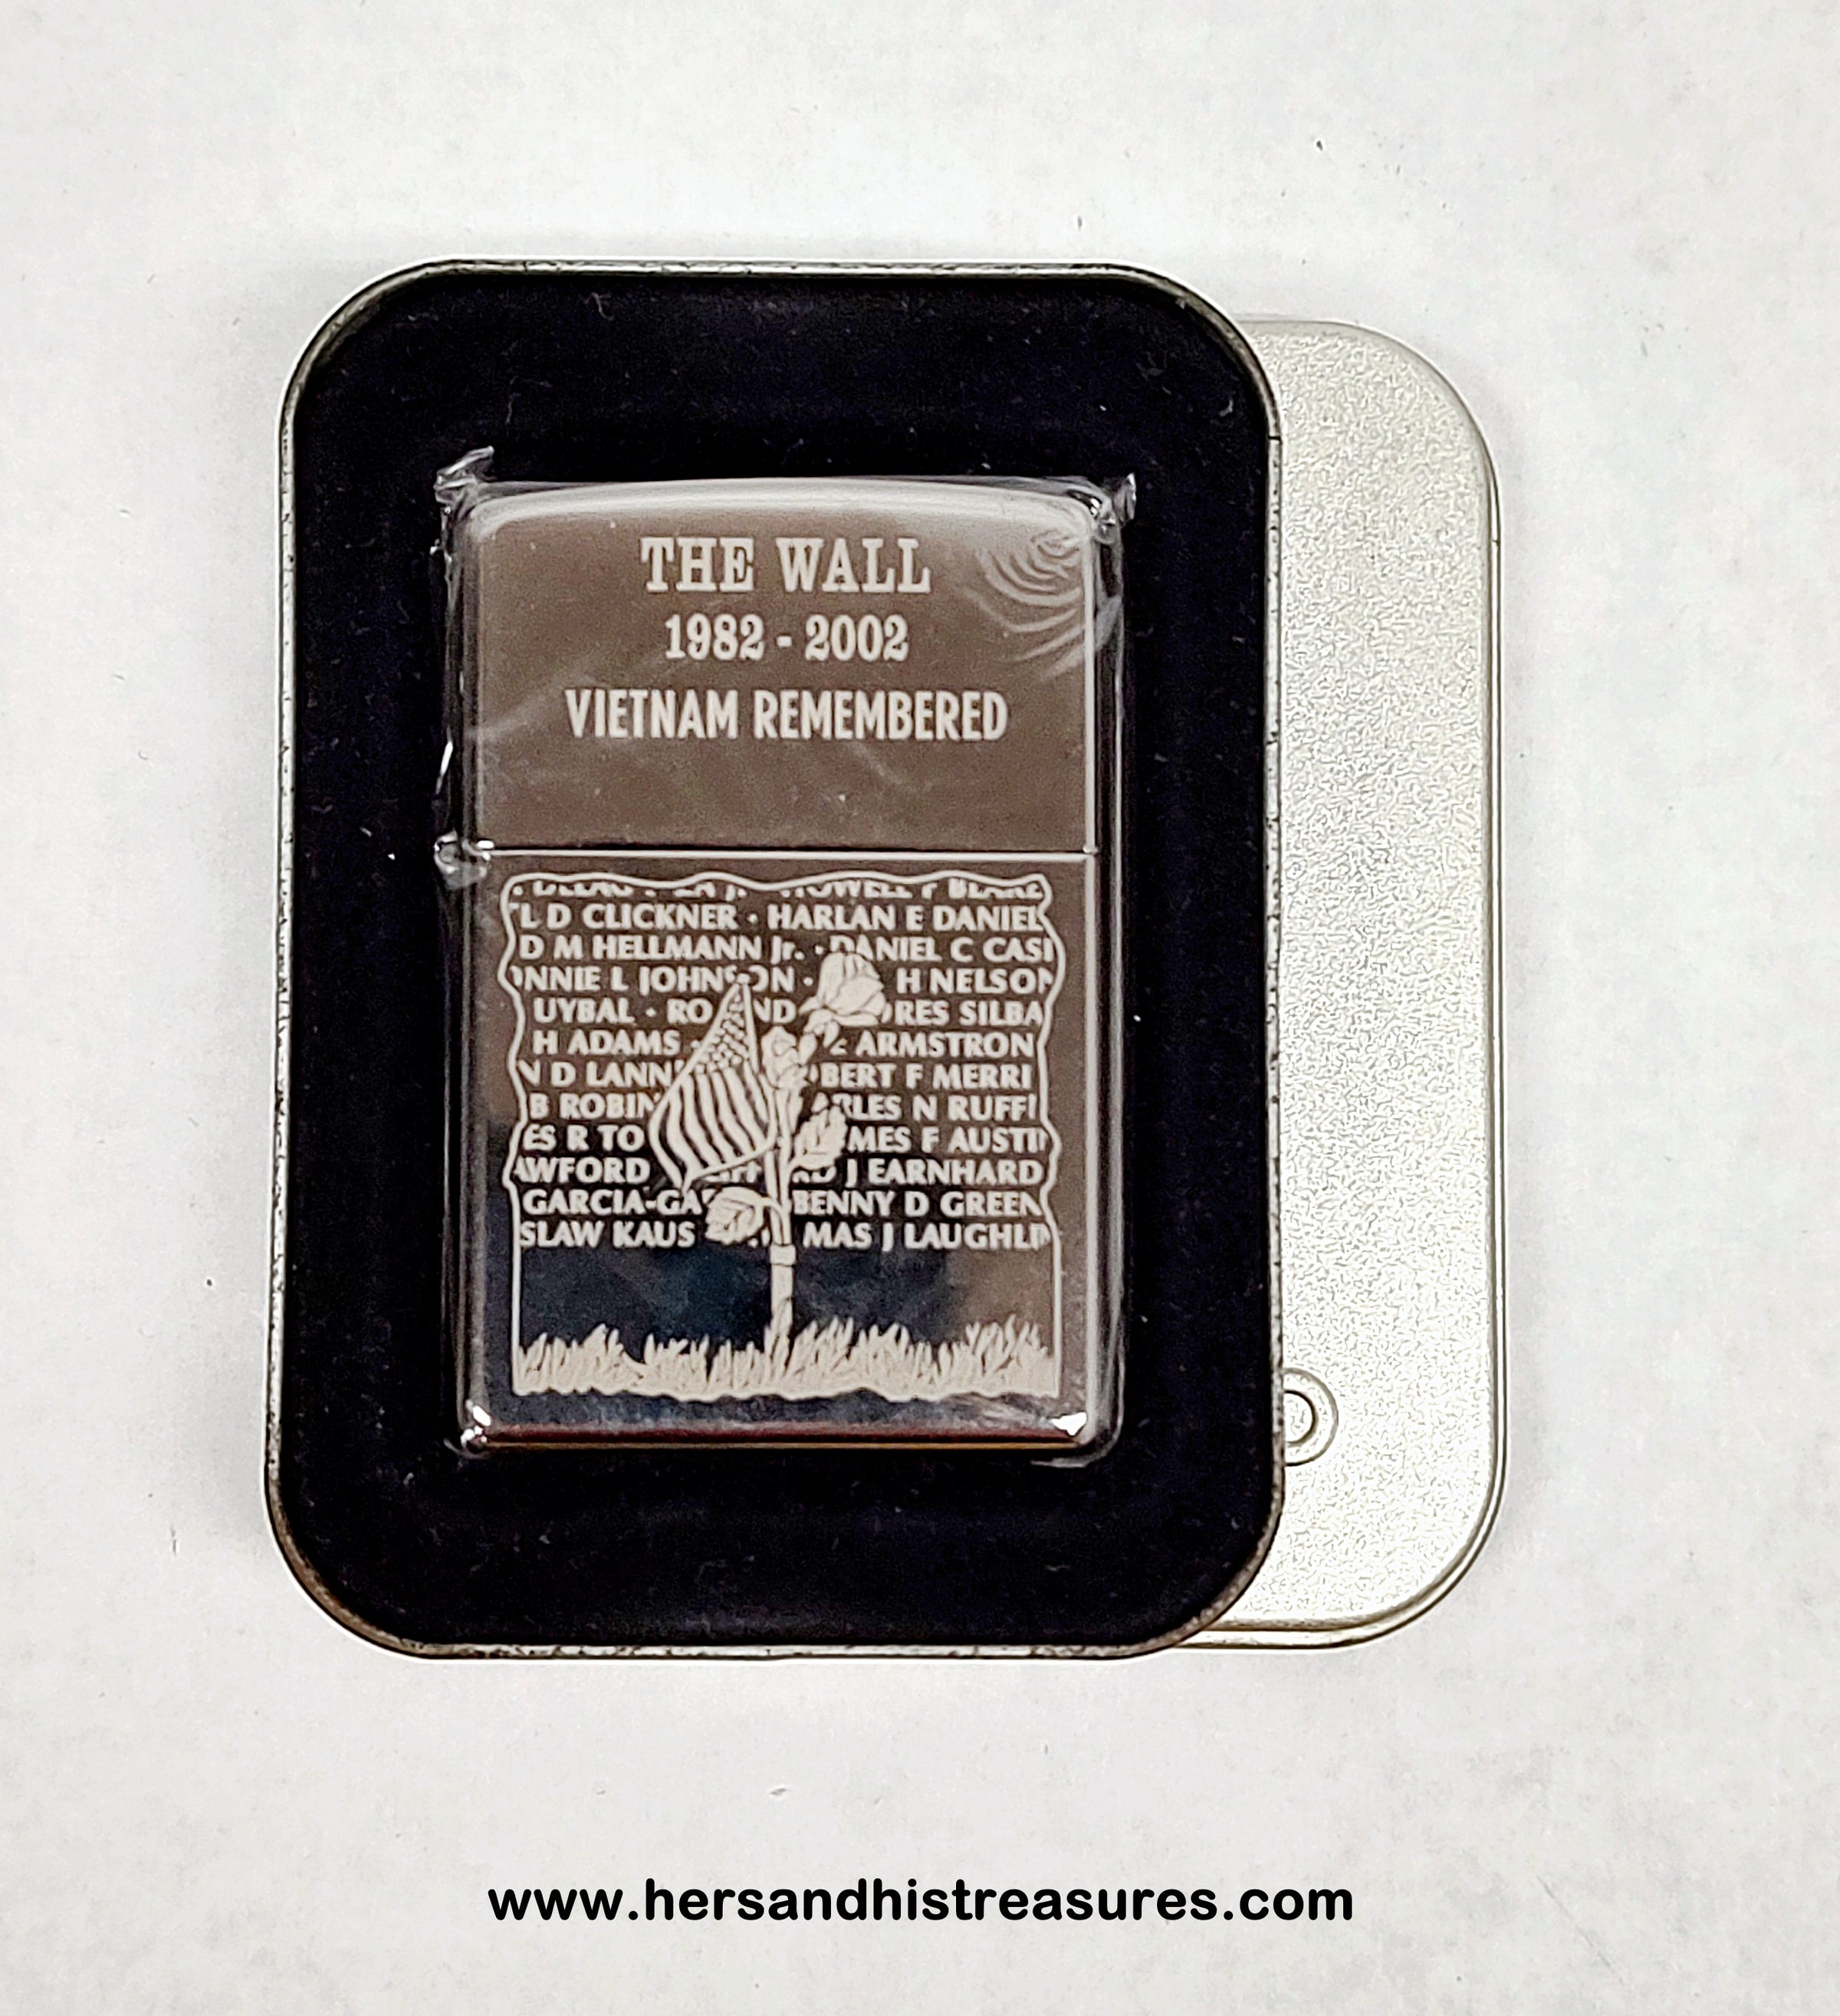 New 2007 The Wall 1982-2002 Vietnam Remembered Zippo Lighter | USA - Hers and His Treasures